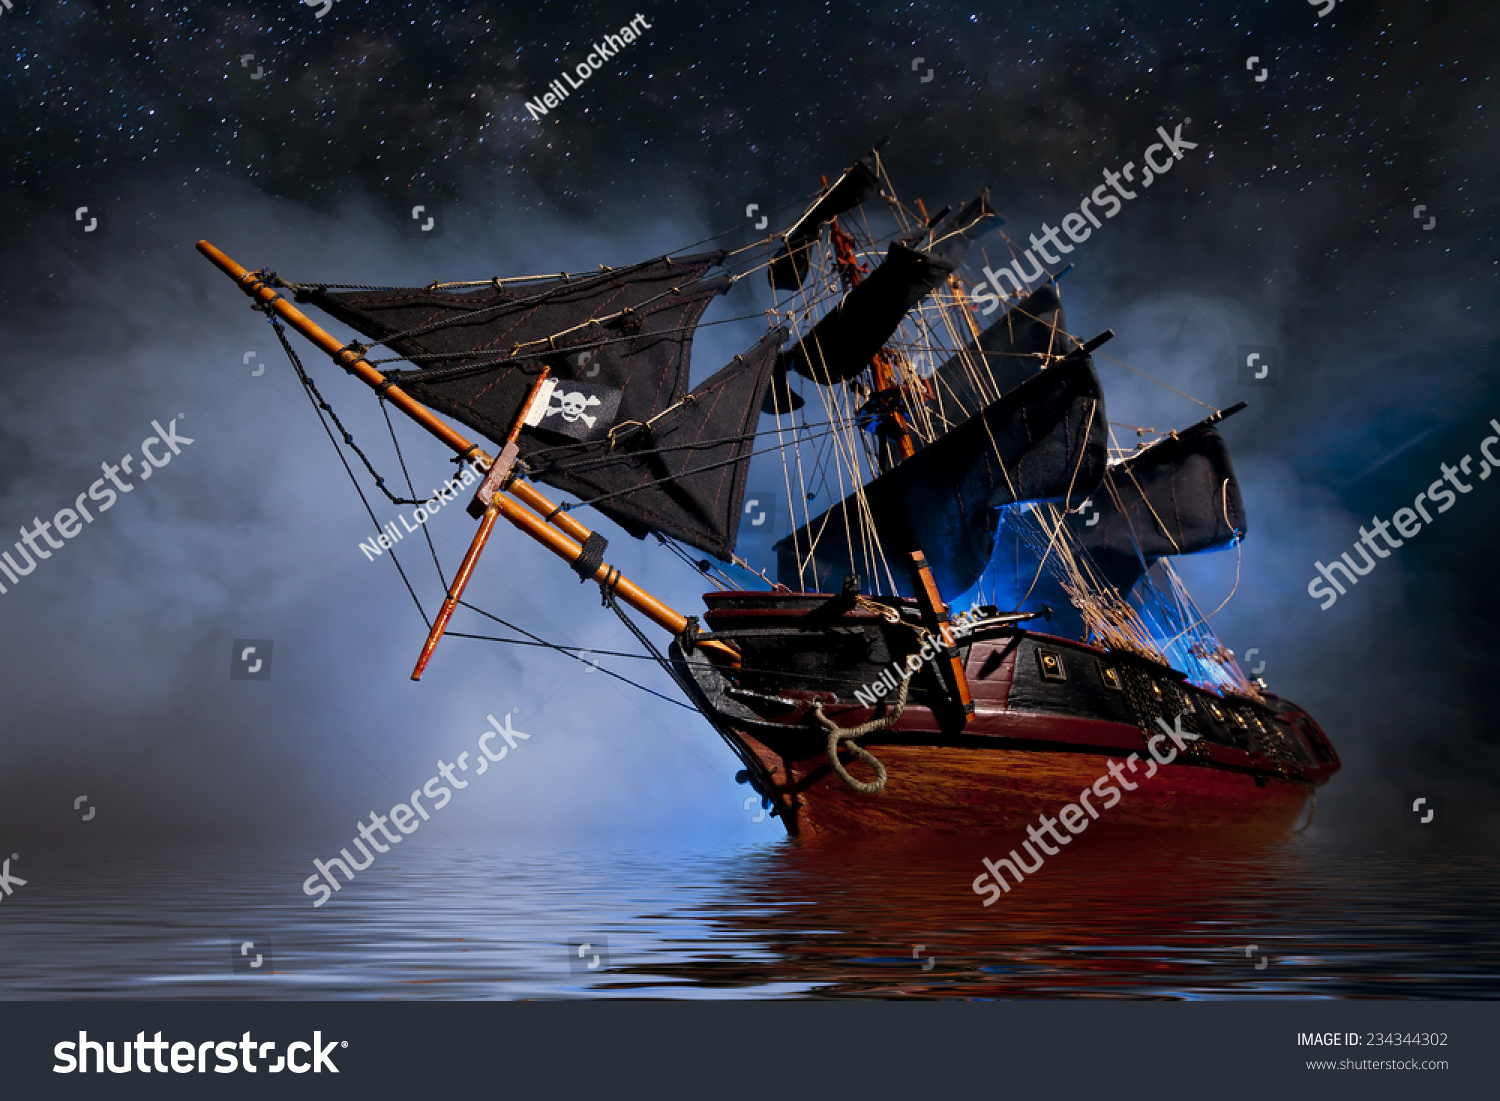 Model Pirate Ship with fog and water #234344302